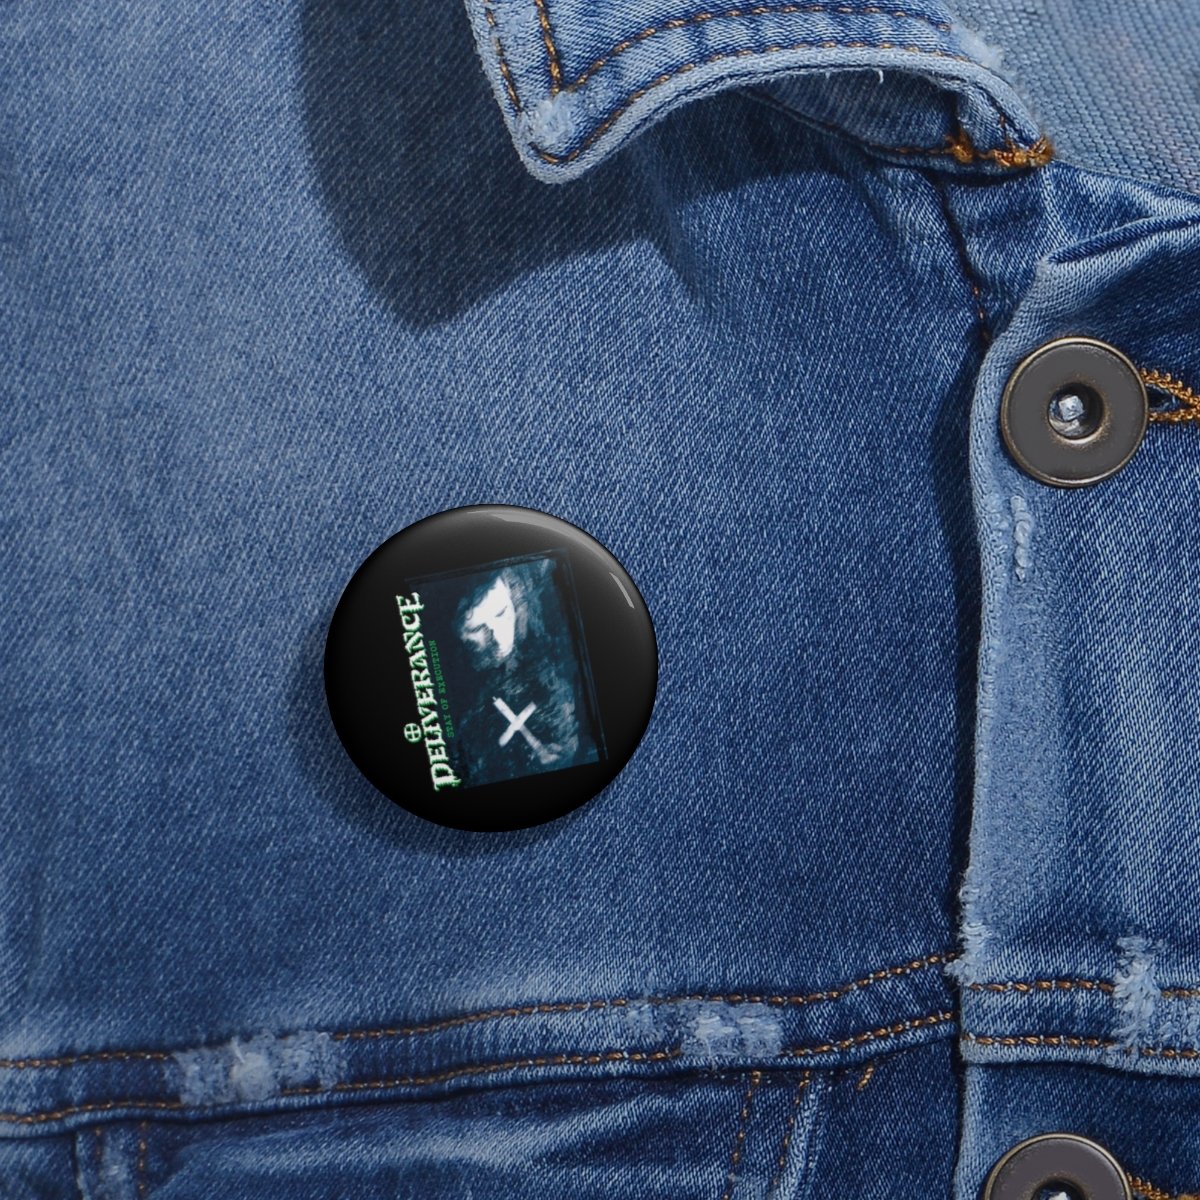 Deliverance – Stay of Execution (Dark) Pin Buttons